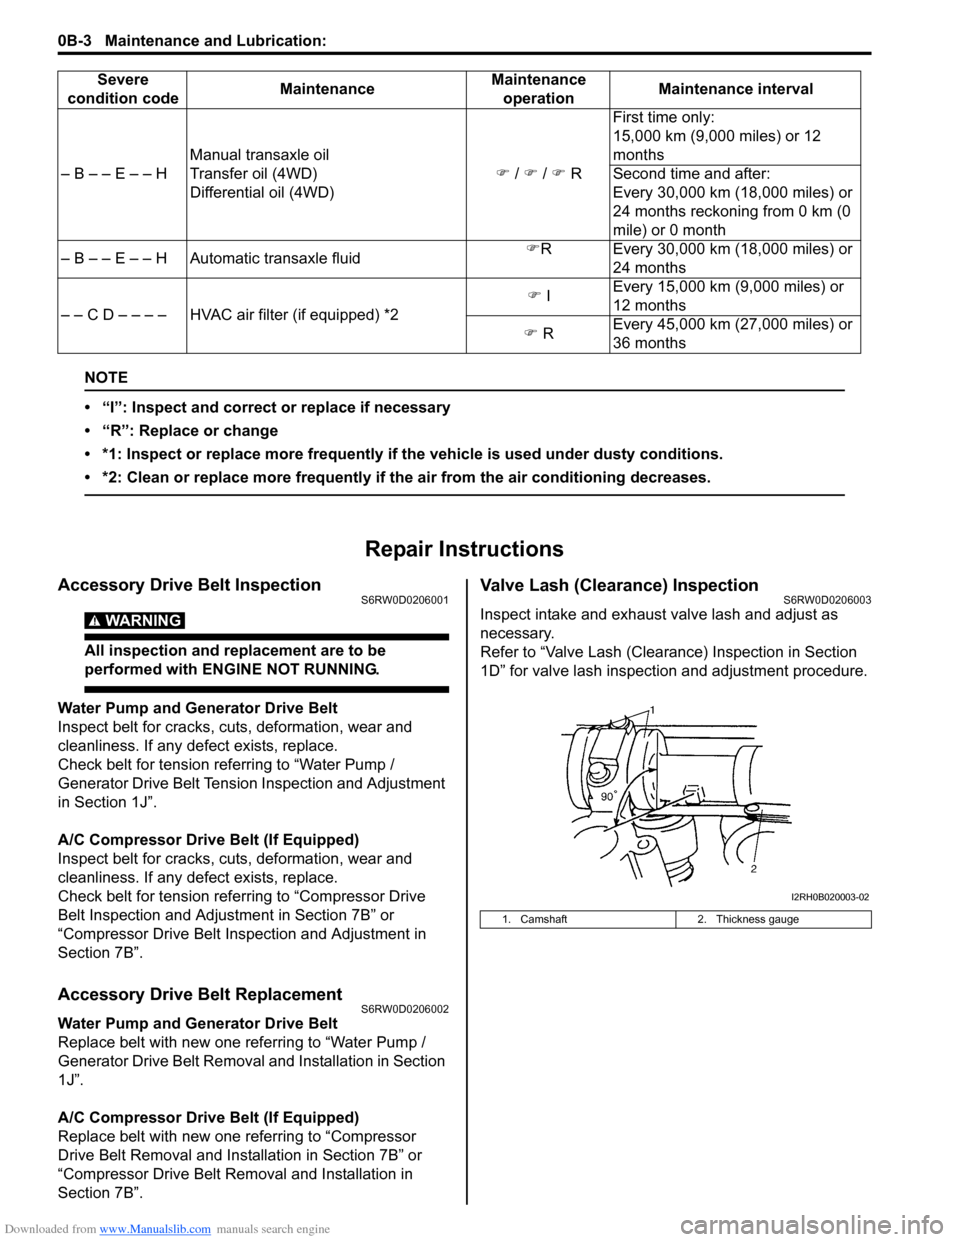 SUZUKI SX4 2006 1.G Service Workshop Manual Downloaded from www.Manualslib.com manuals search engine 0B-3 Maintenance and Lubrication: 
NOTE
• “I”: Inspect and correct or replace if necessary
• “R”: Replace or change
• *1: Inspect